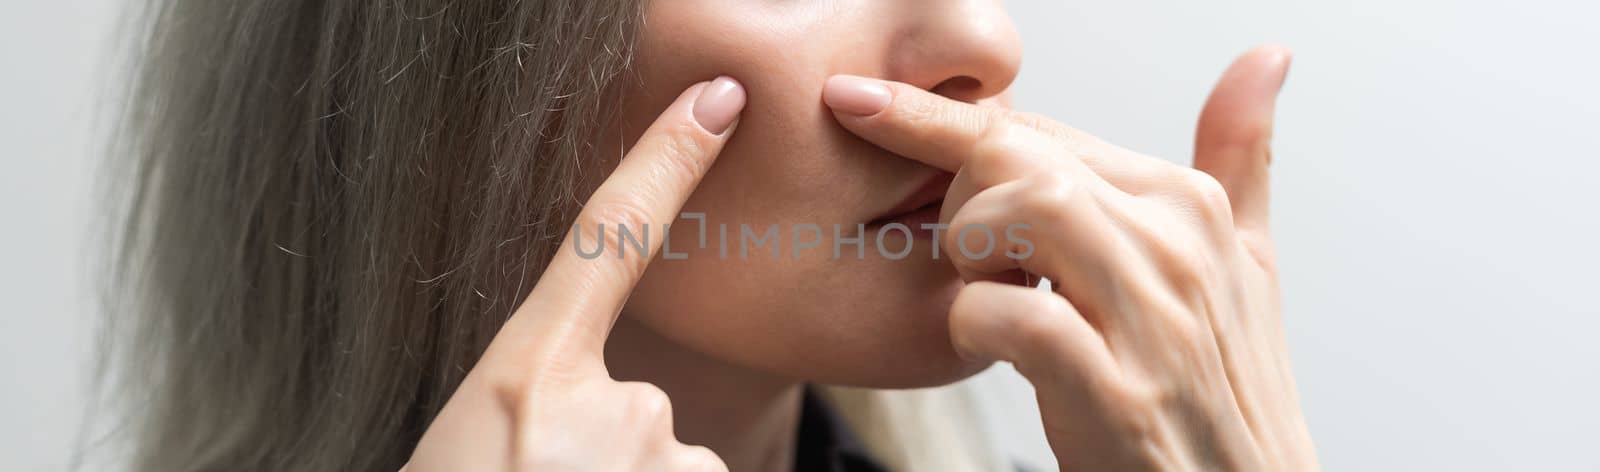 young woman squeezing pimples on the face.